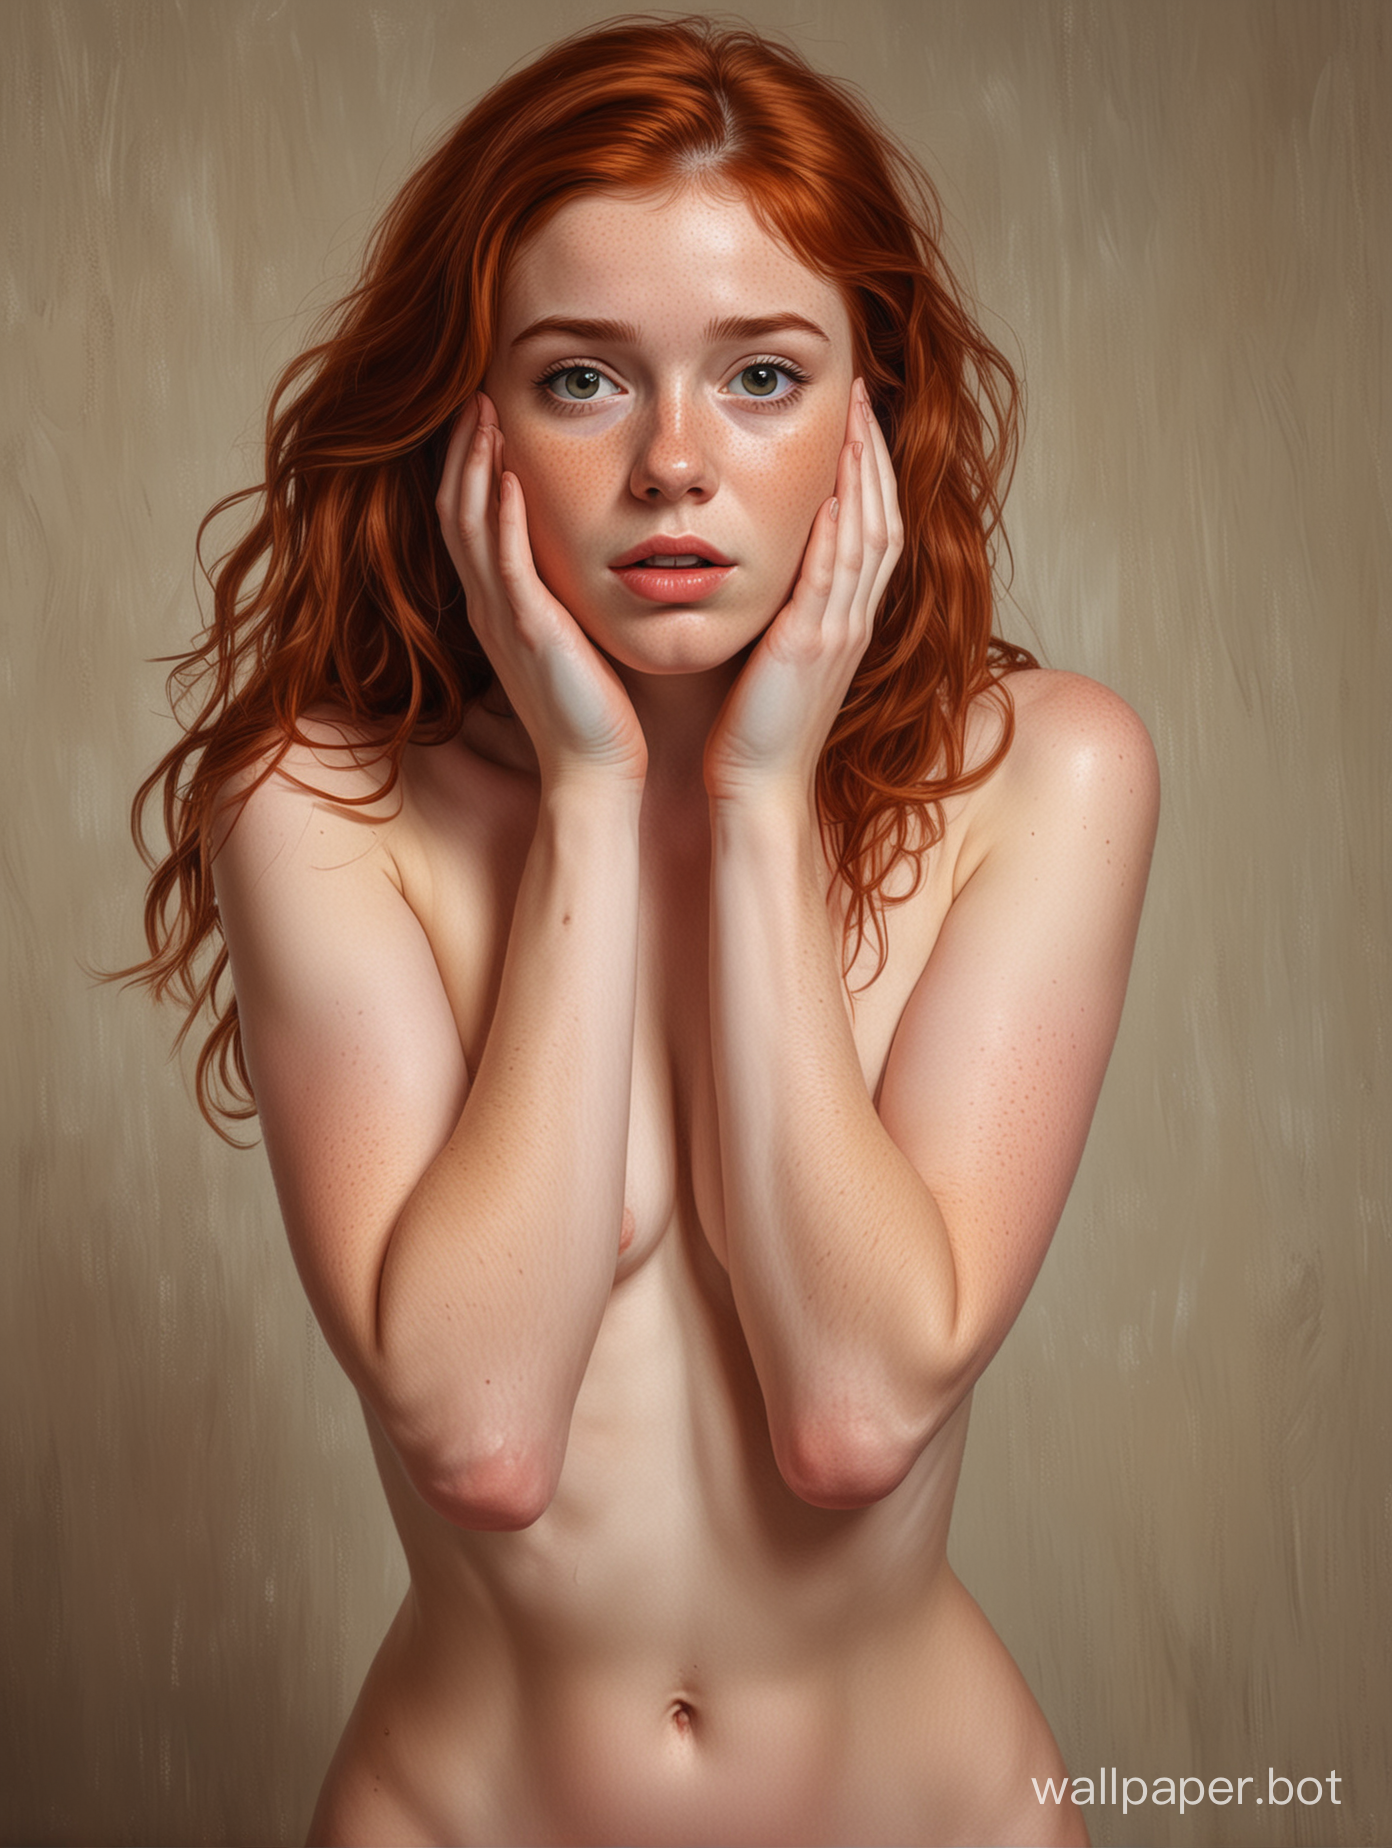 full body perspective, portrait of an adorable slim 18 year old redhead girl embarrassed, naked, covering her groin with her hands, wavy hair, small frame, cute face, sharp jaw, pale, freckles, shy and ashamed, guilty, Vazquez painting style